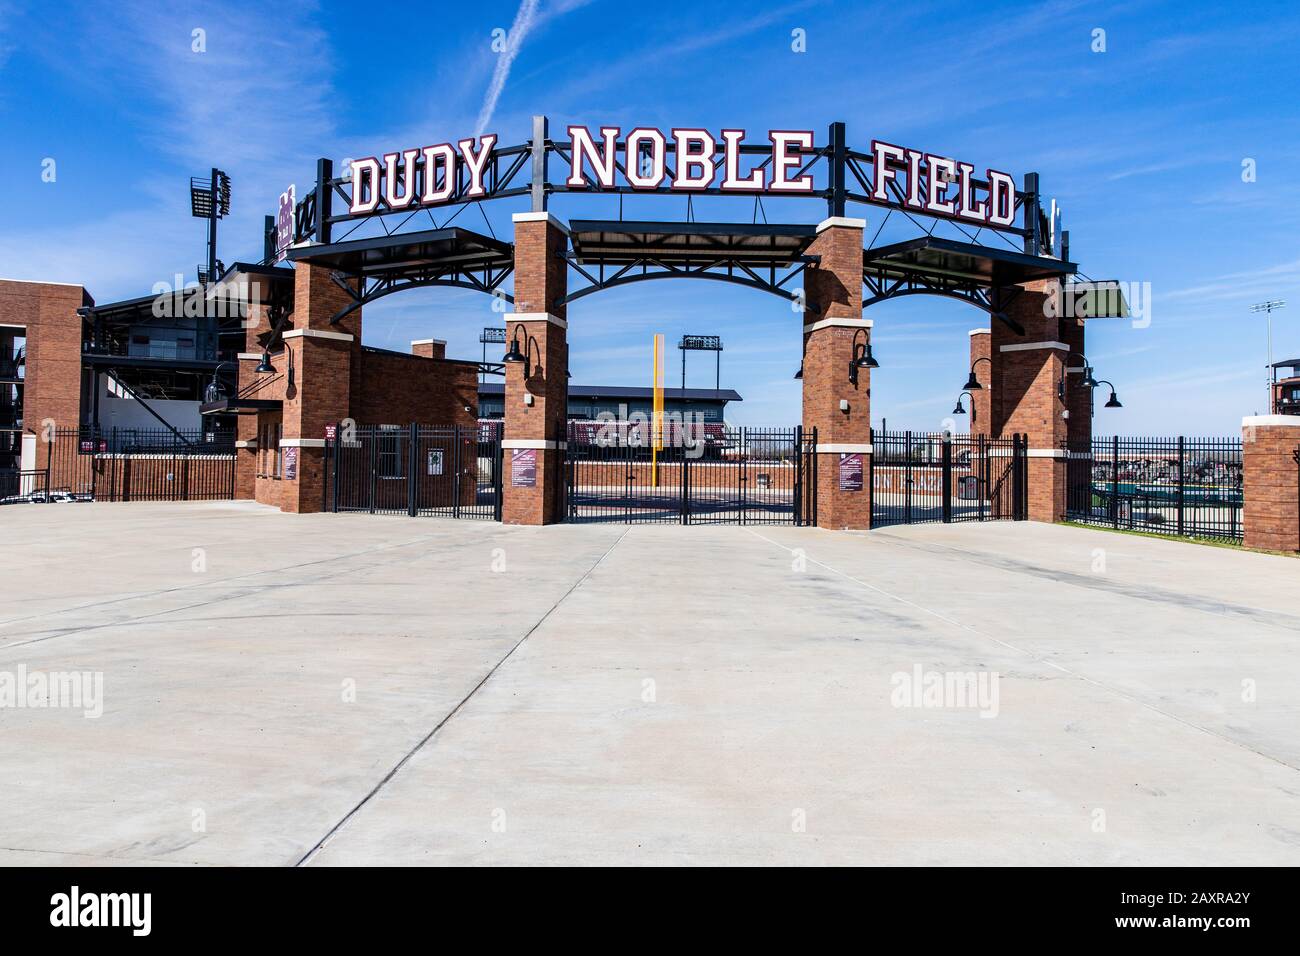 Starkville, MS / USA - February 9, 2020: Entrance to Dudy Noble Field, home of Mississippi State University baseball Stock Photo